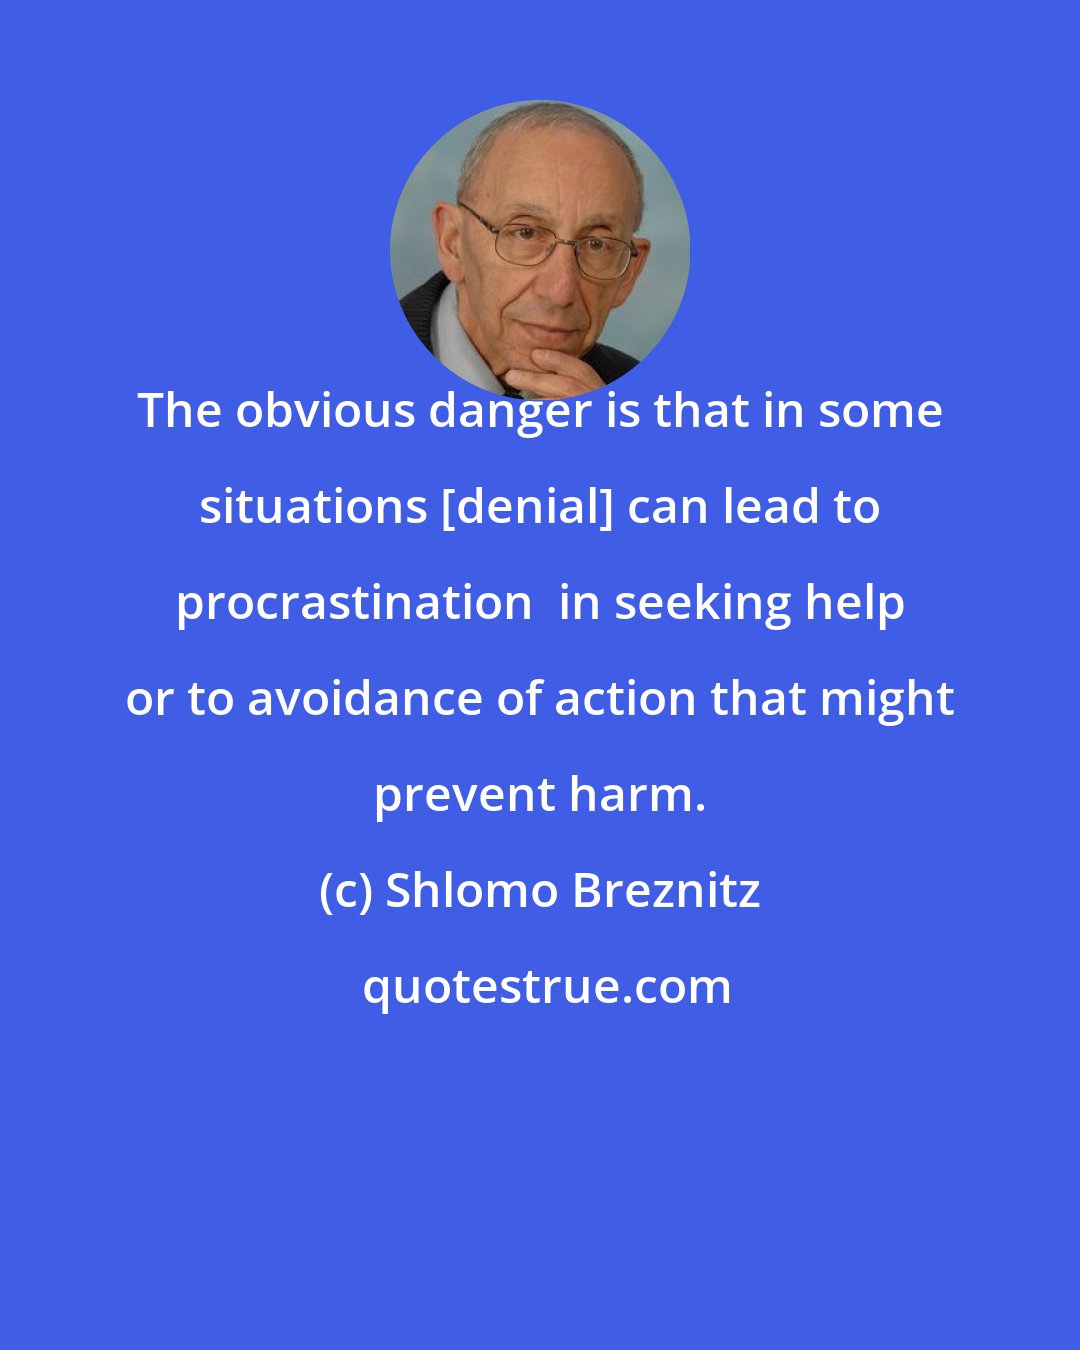 Shlomo Breznitz: The obvious danger is that in some situations [denial] can lead to procrastination  in seeking help or to avoidance of action that might prevent harm.